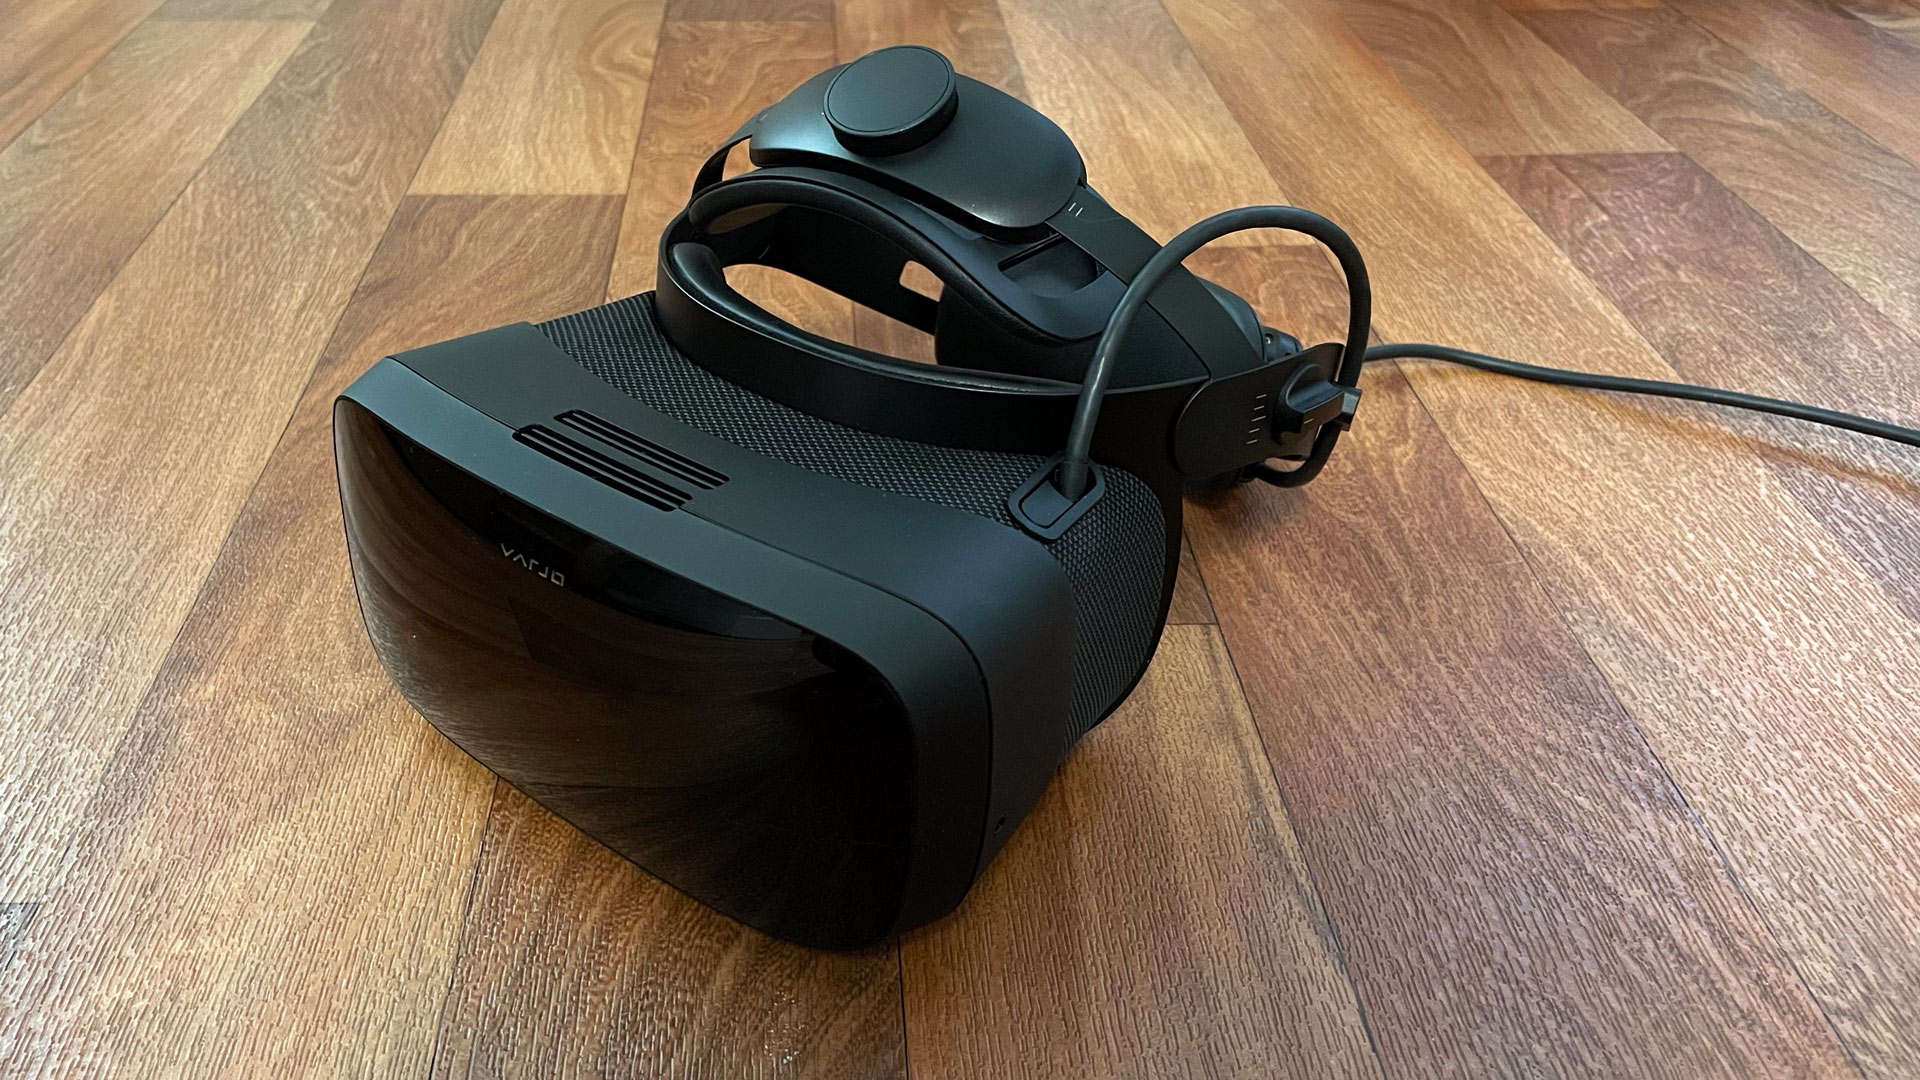 Varjo Cuts Price of High-end Aero PC VR Headset by 50% – Road to VR